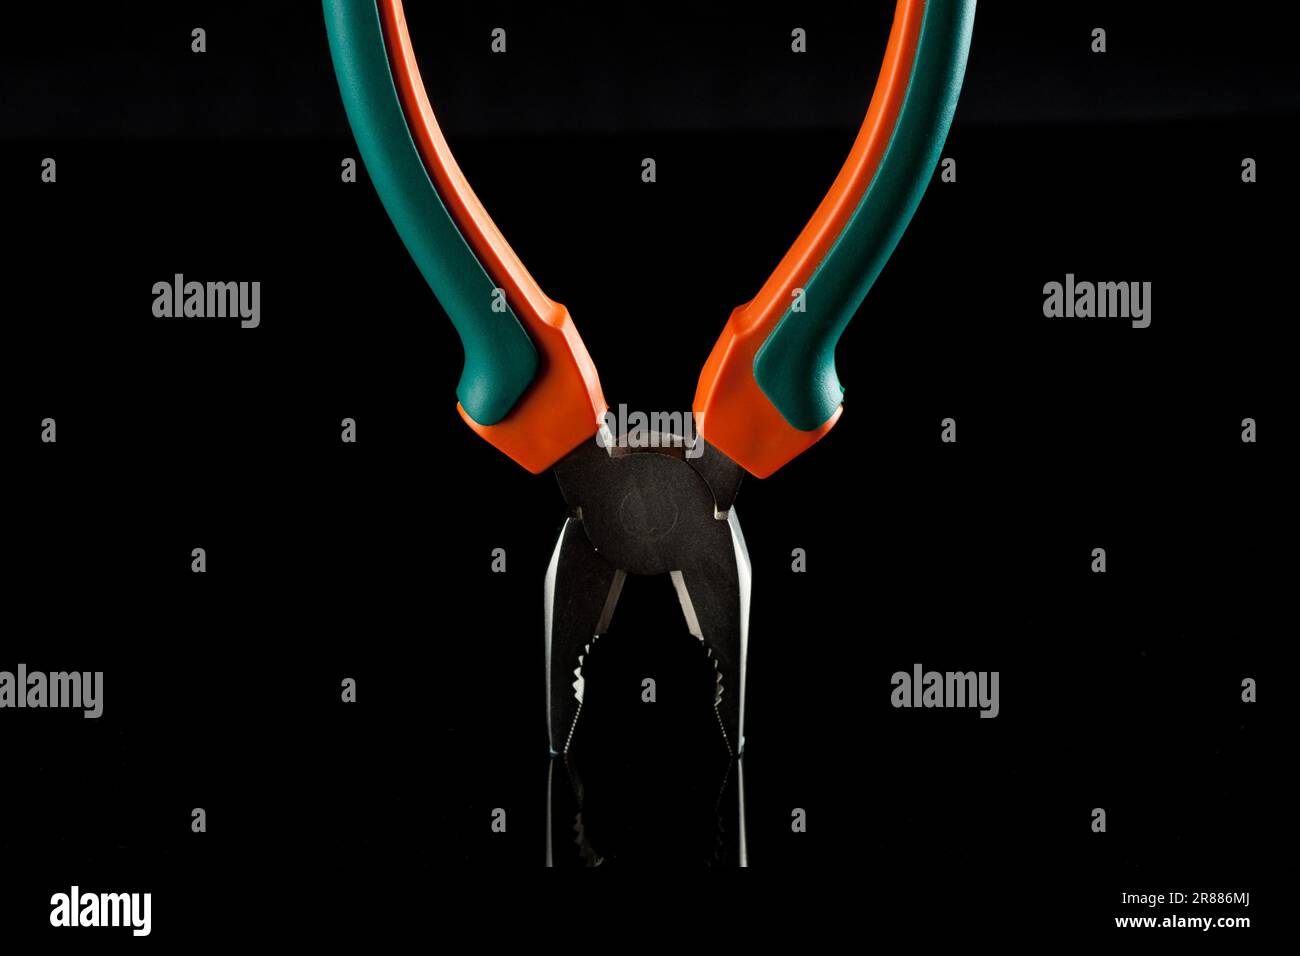 Metal flat-nose pliers with rubbed green and orange grips Stock Photo